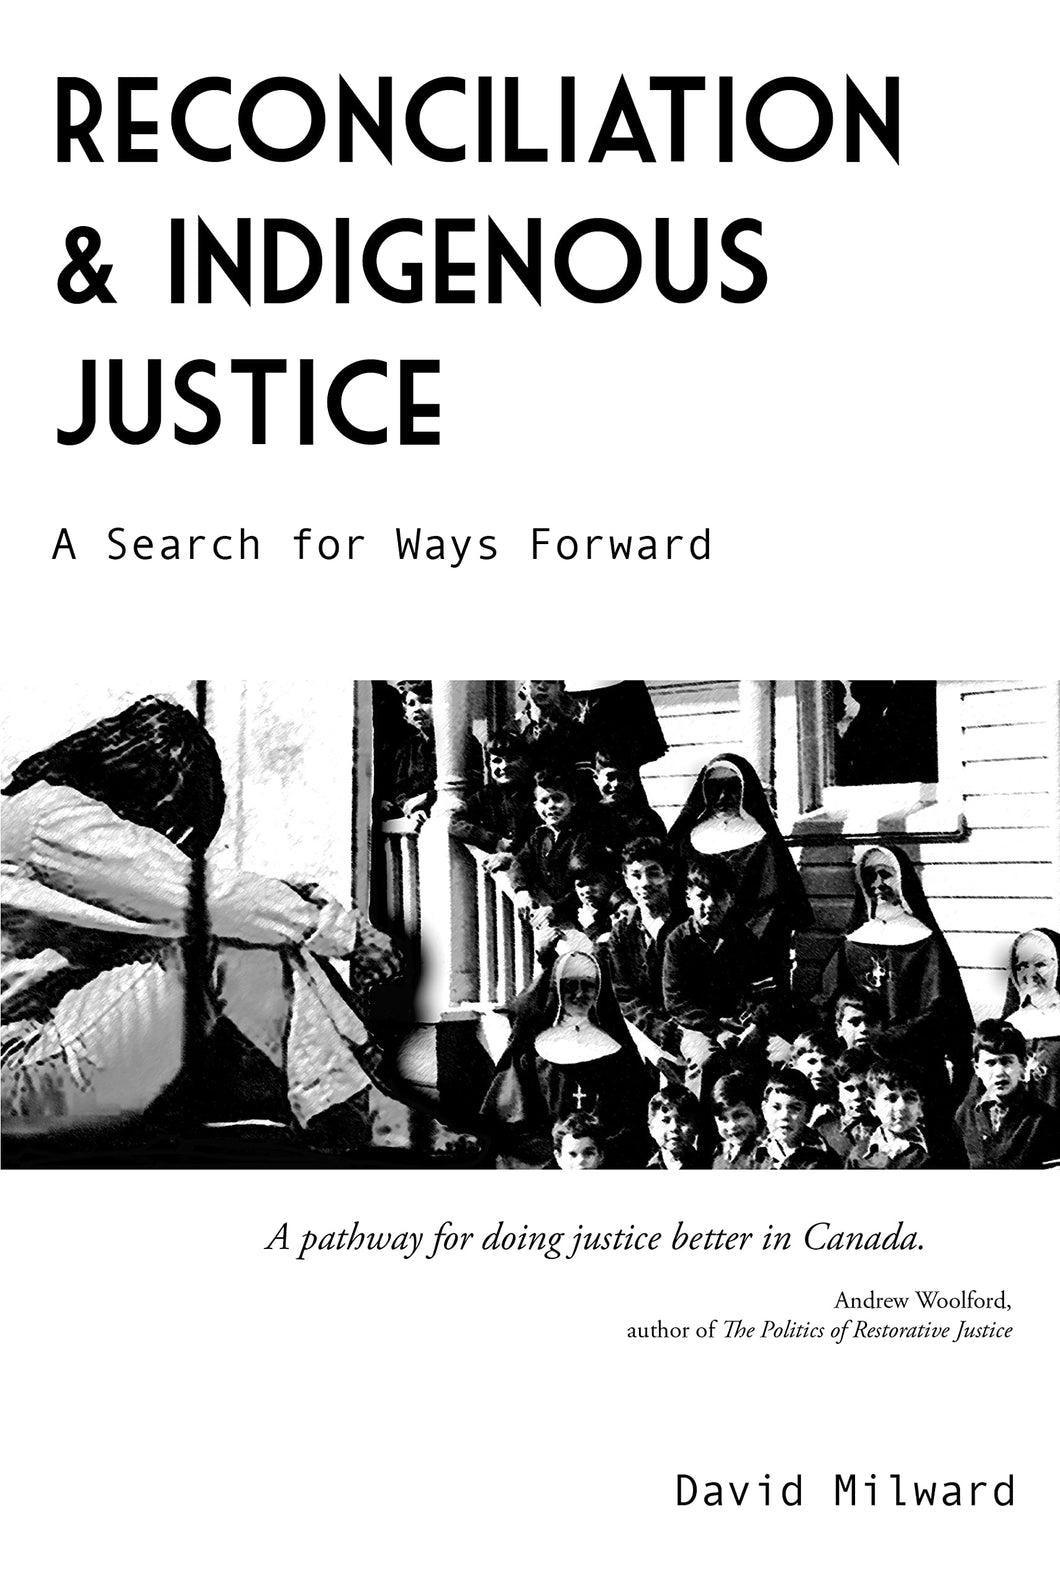 Reconciliation And Indigenous Justice: A Search For Ways Forward [David Milward]